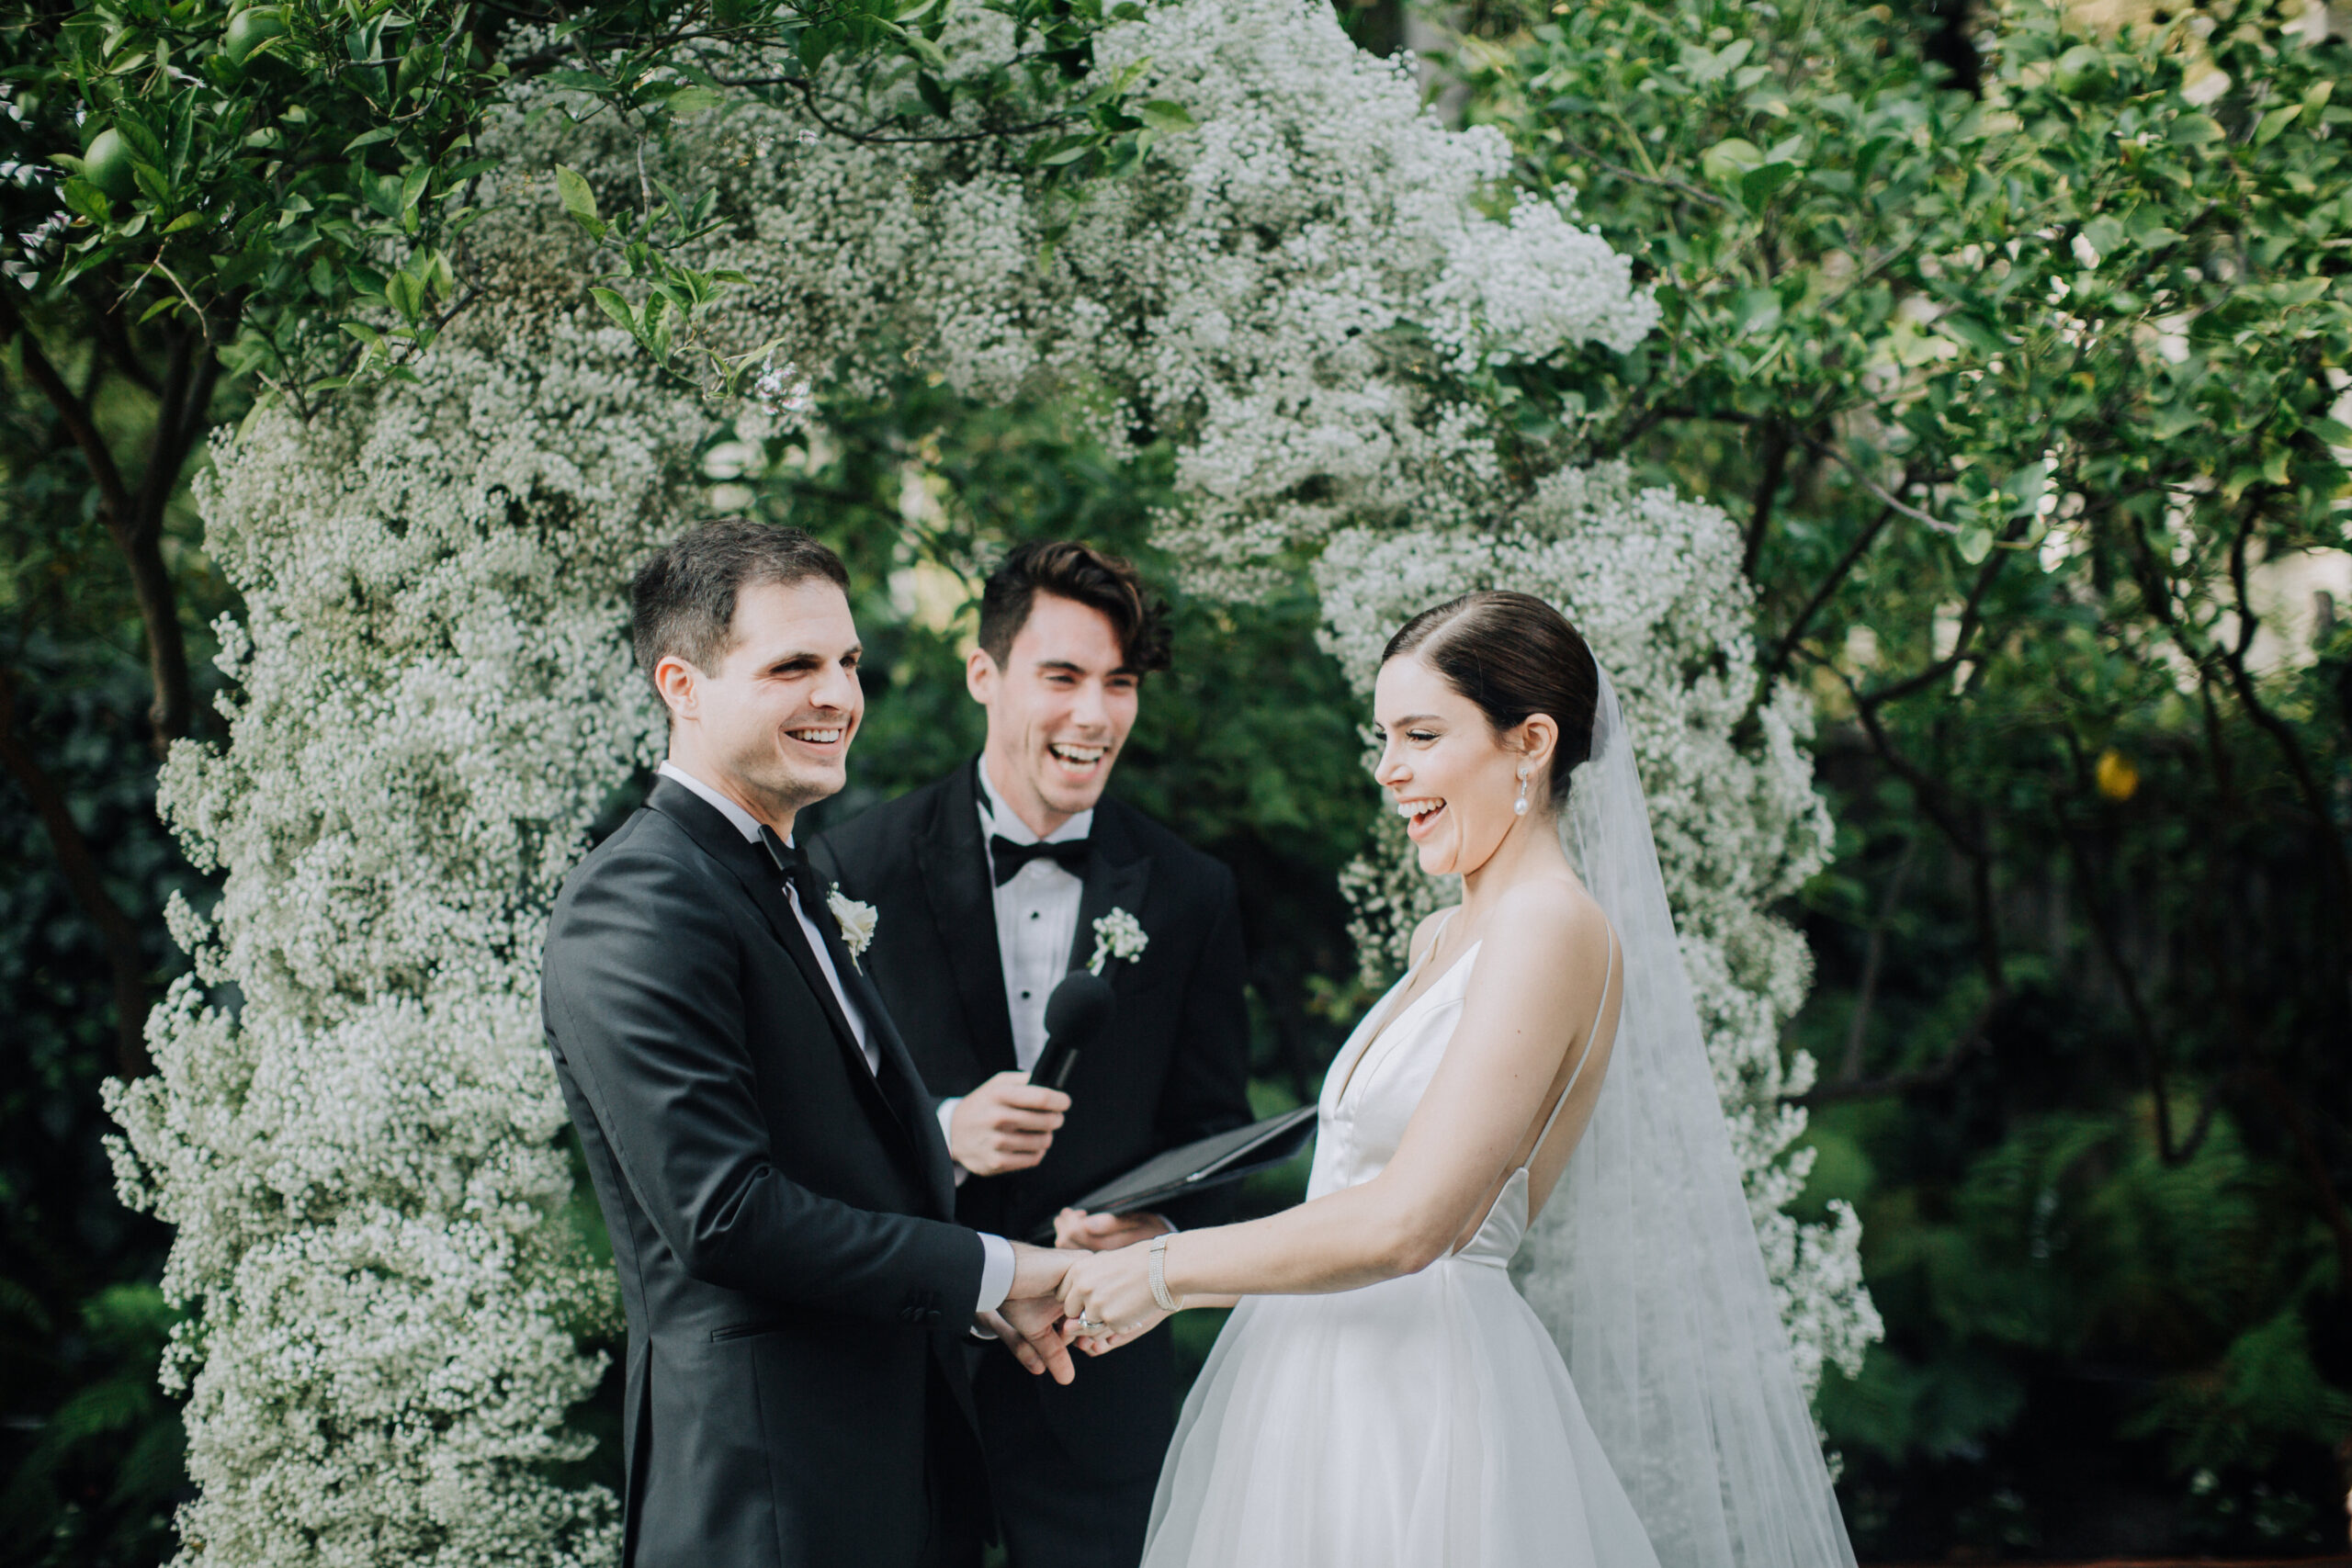 bride and groom share emotional moments during their elegant backyard garden wedding ceremony in Los Angeles